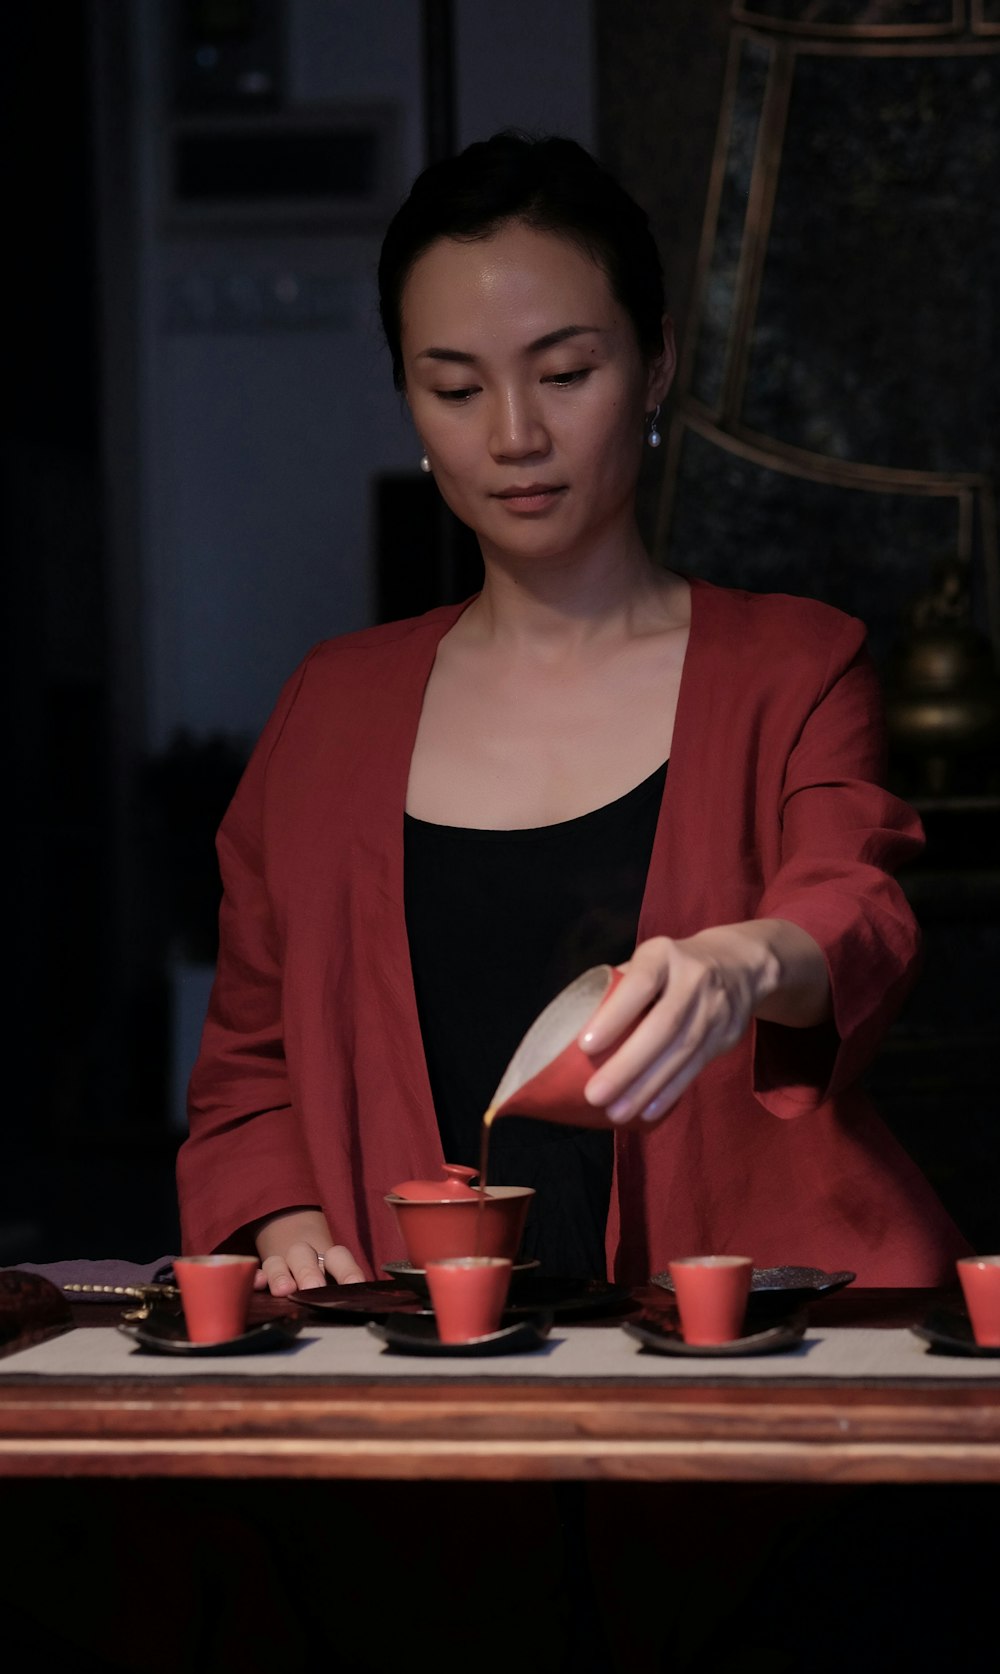 woman in red blazer pouring tea on teacup